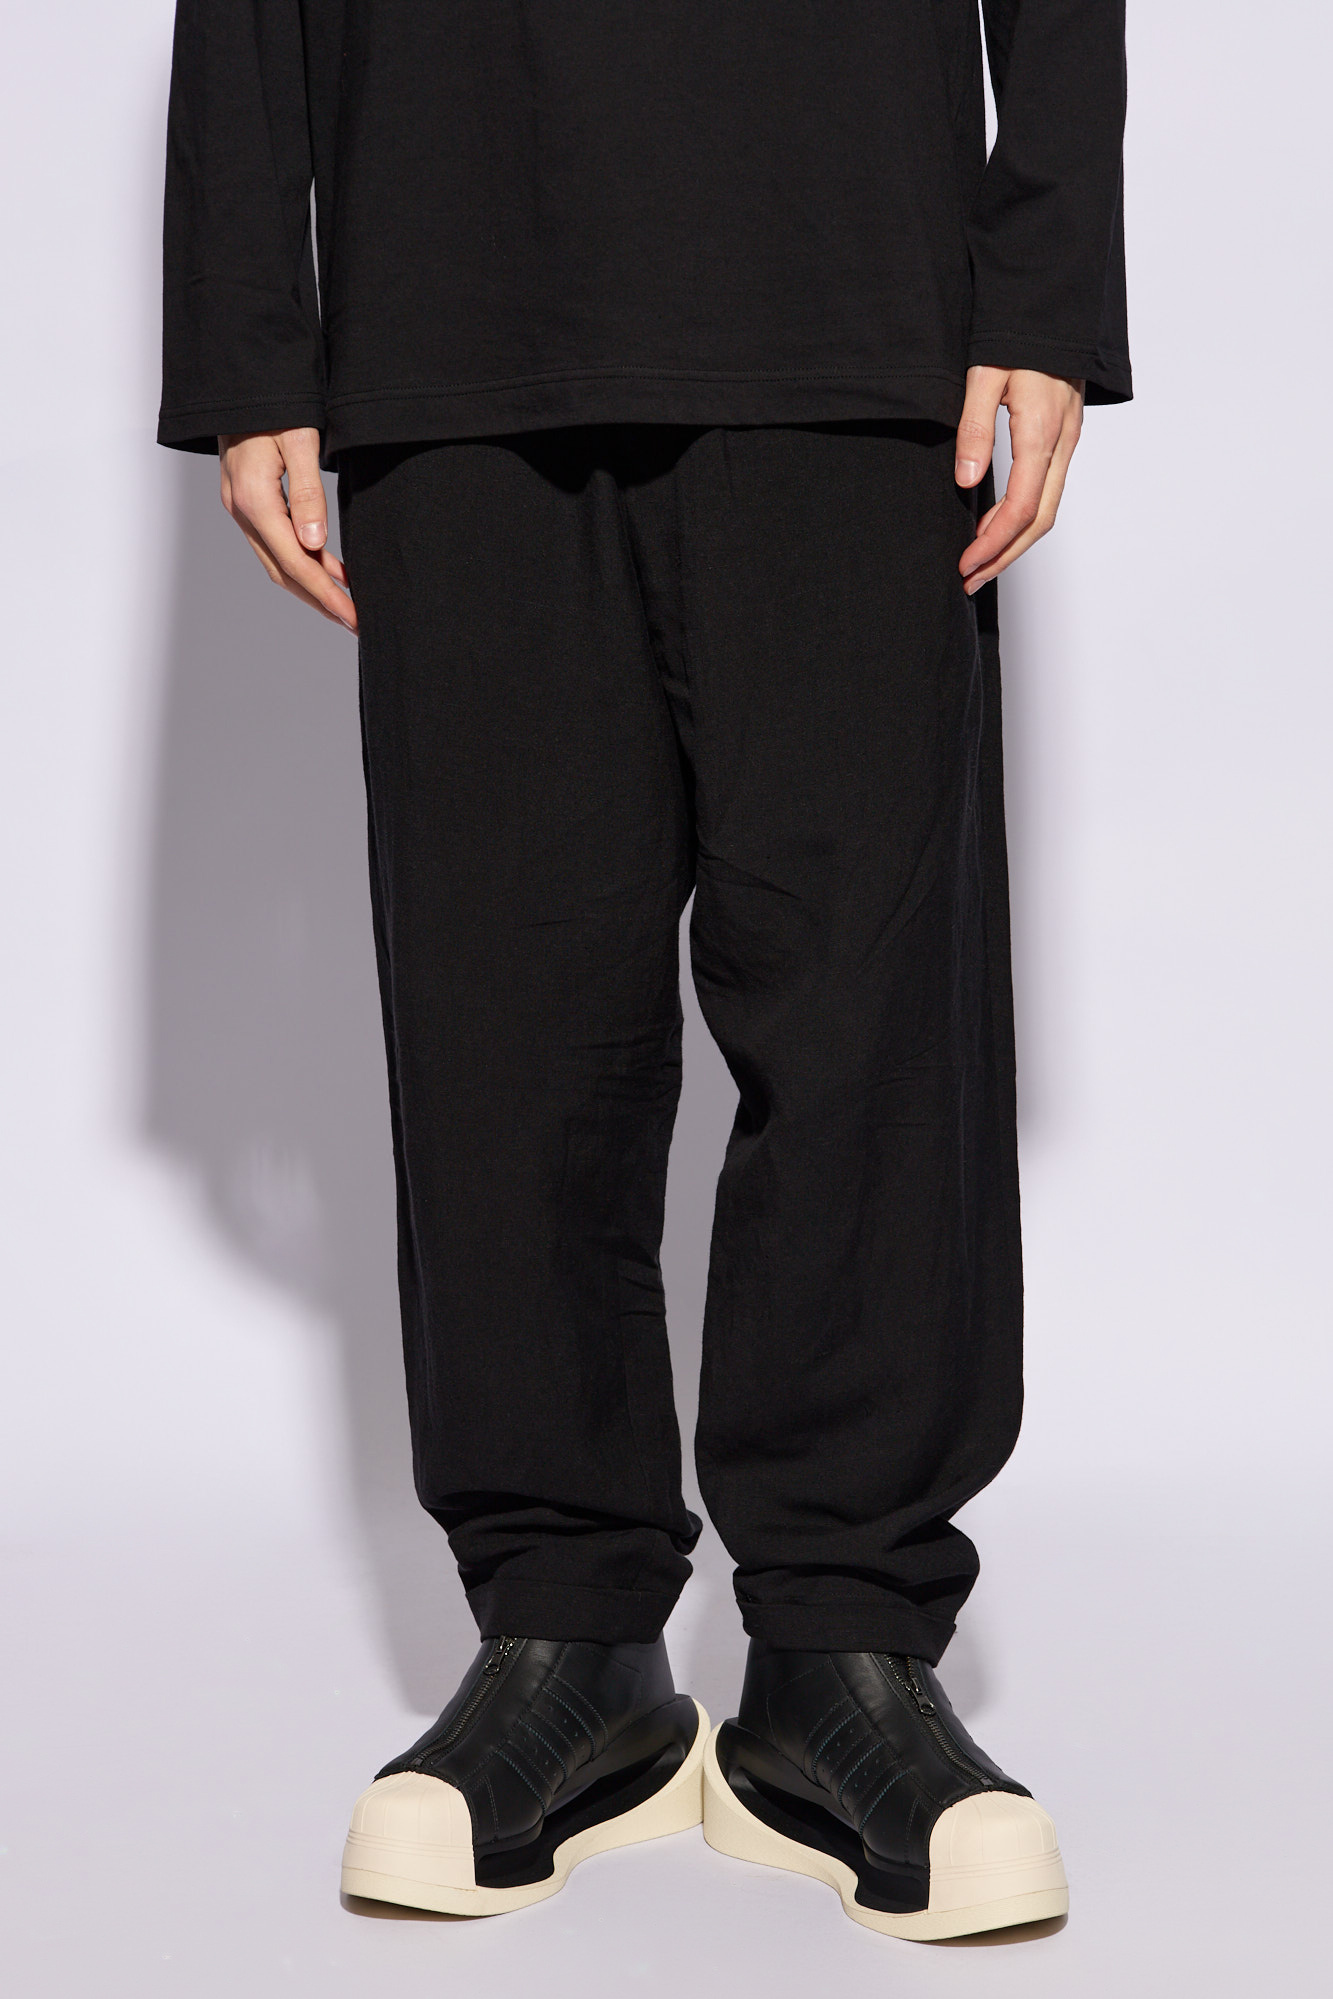 Yohji Yamamoto trousers sabelle with tapered legs